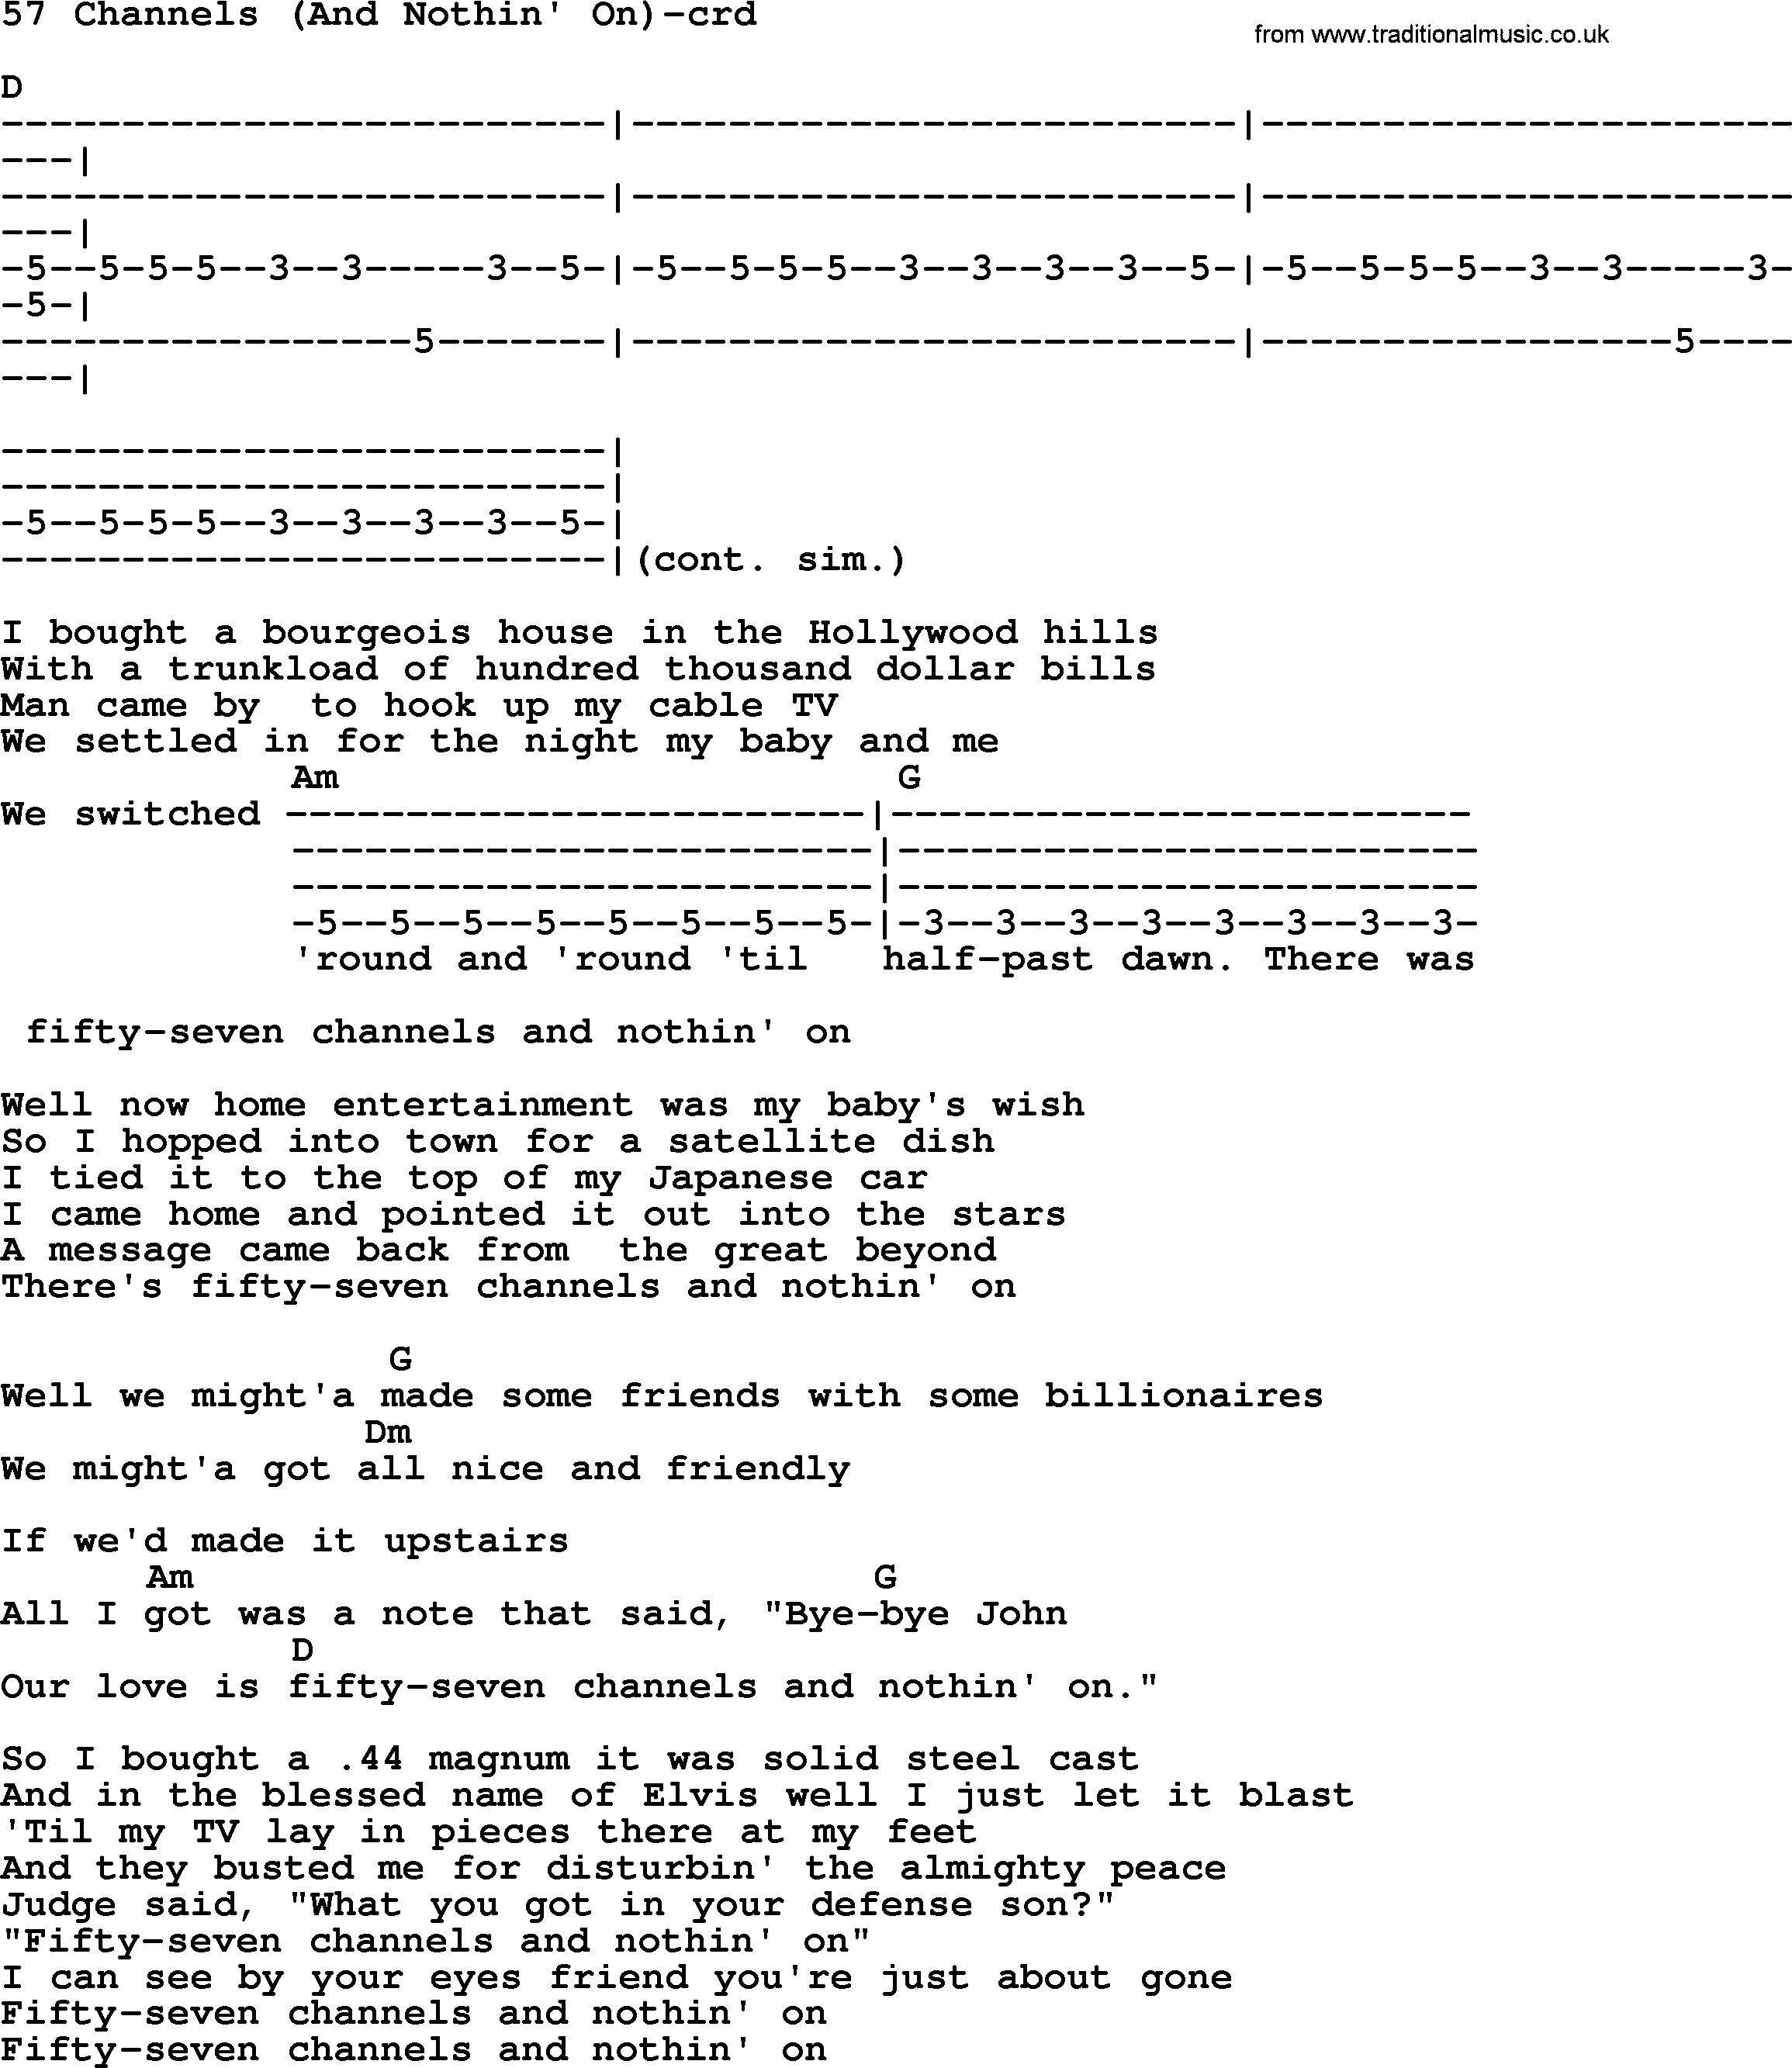 Bruce Springsteen song: 57 Channels(And Nothin' On), lyrics and chords